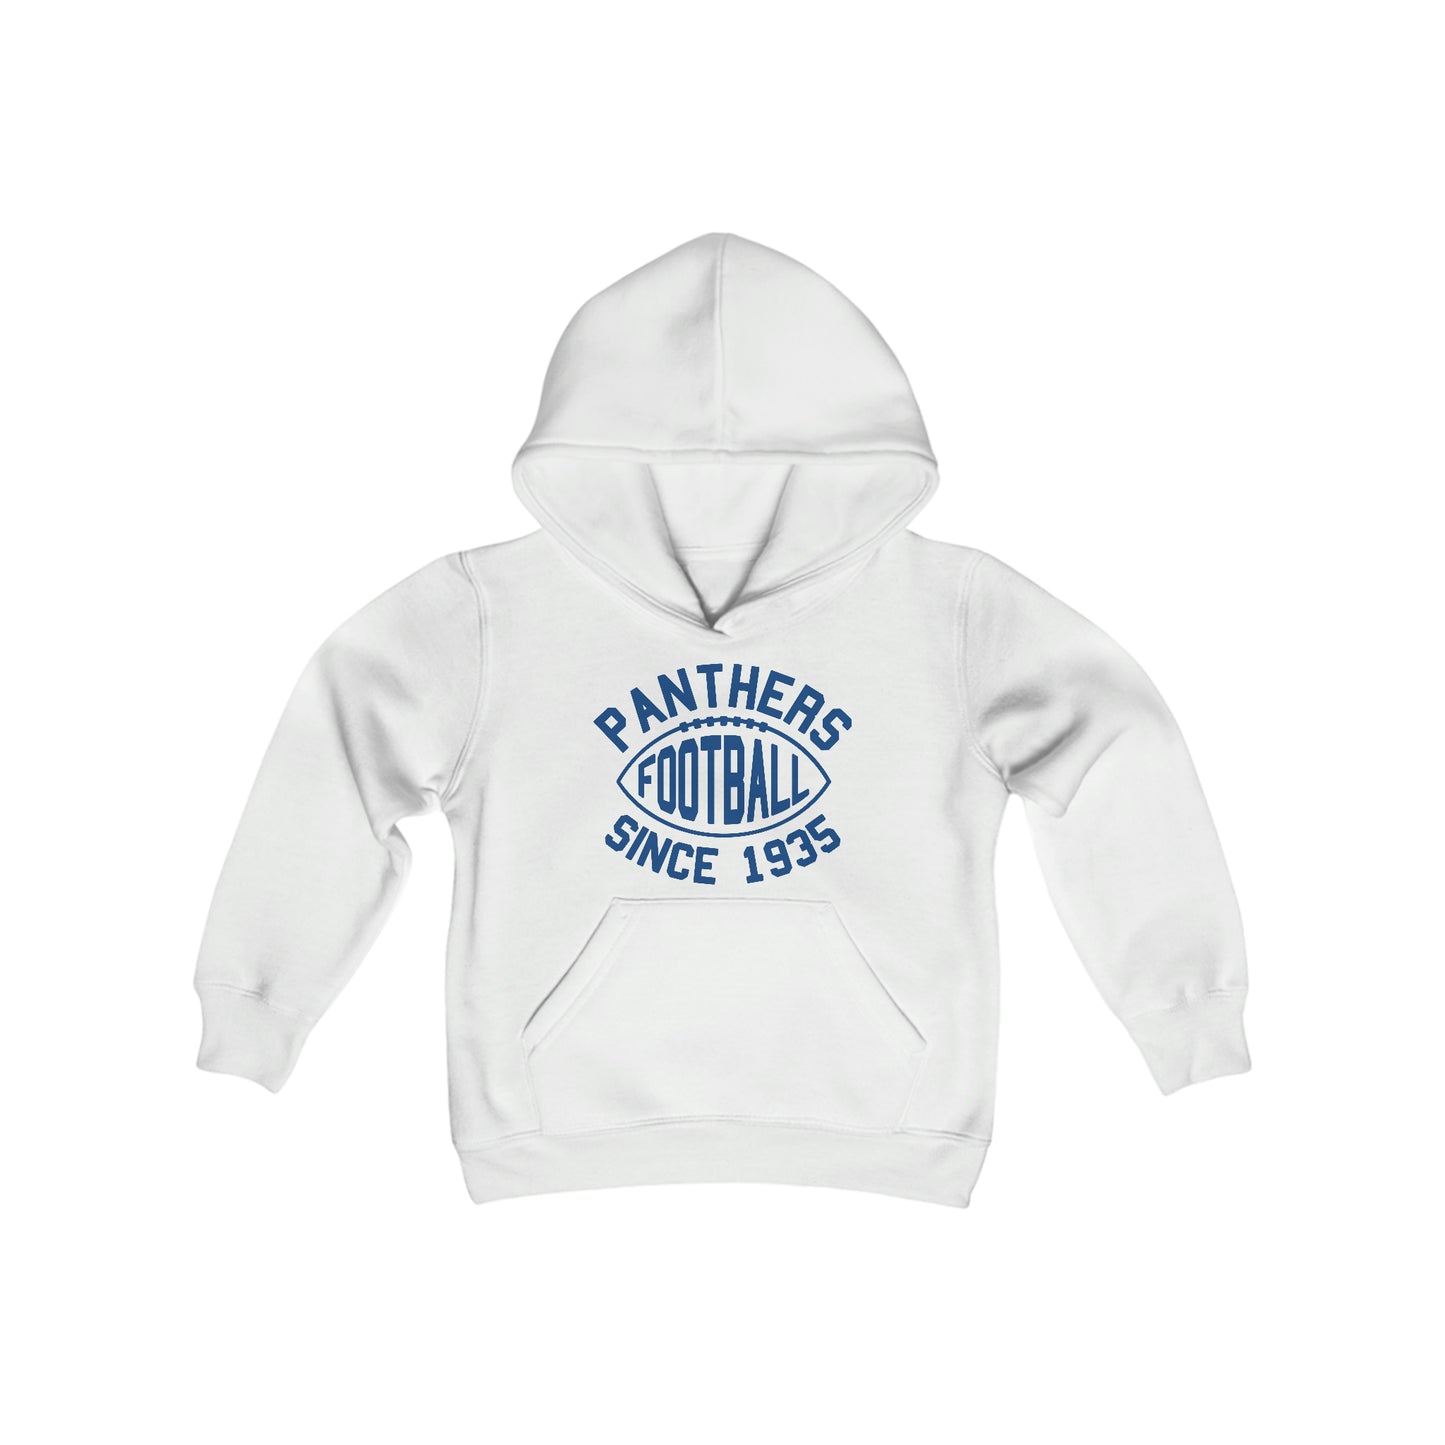 Panthers Football Youth Hoodie